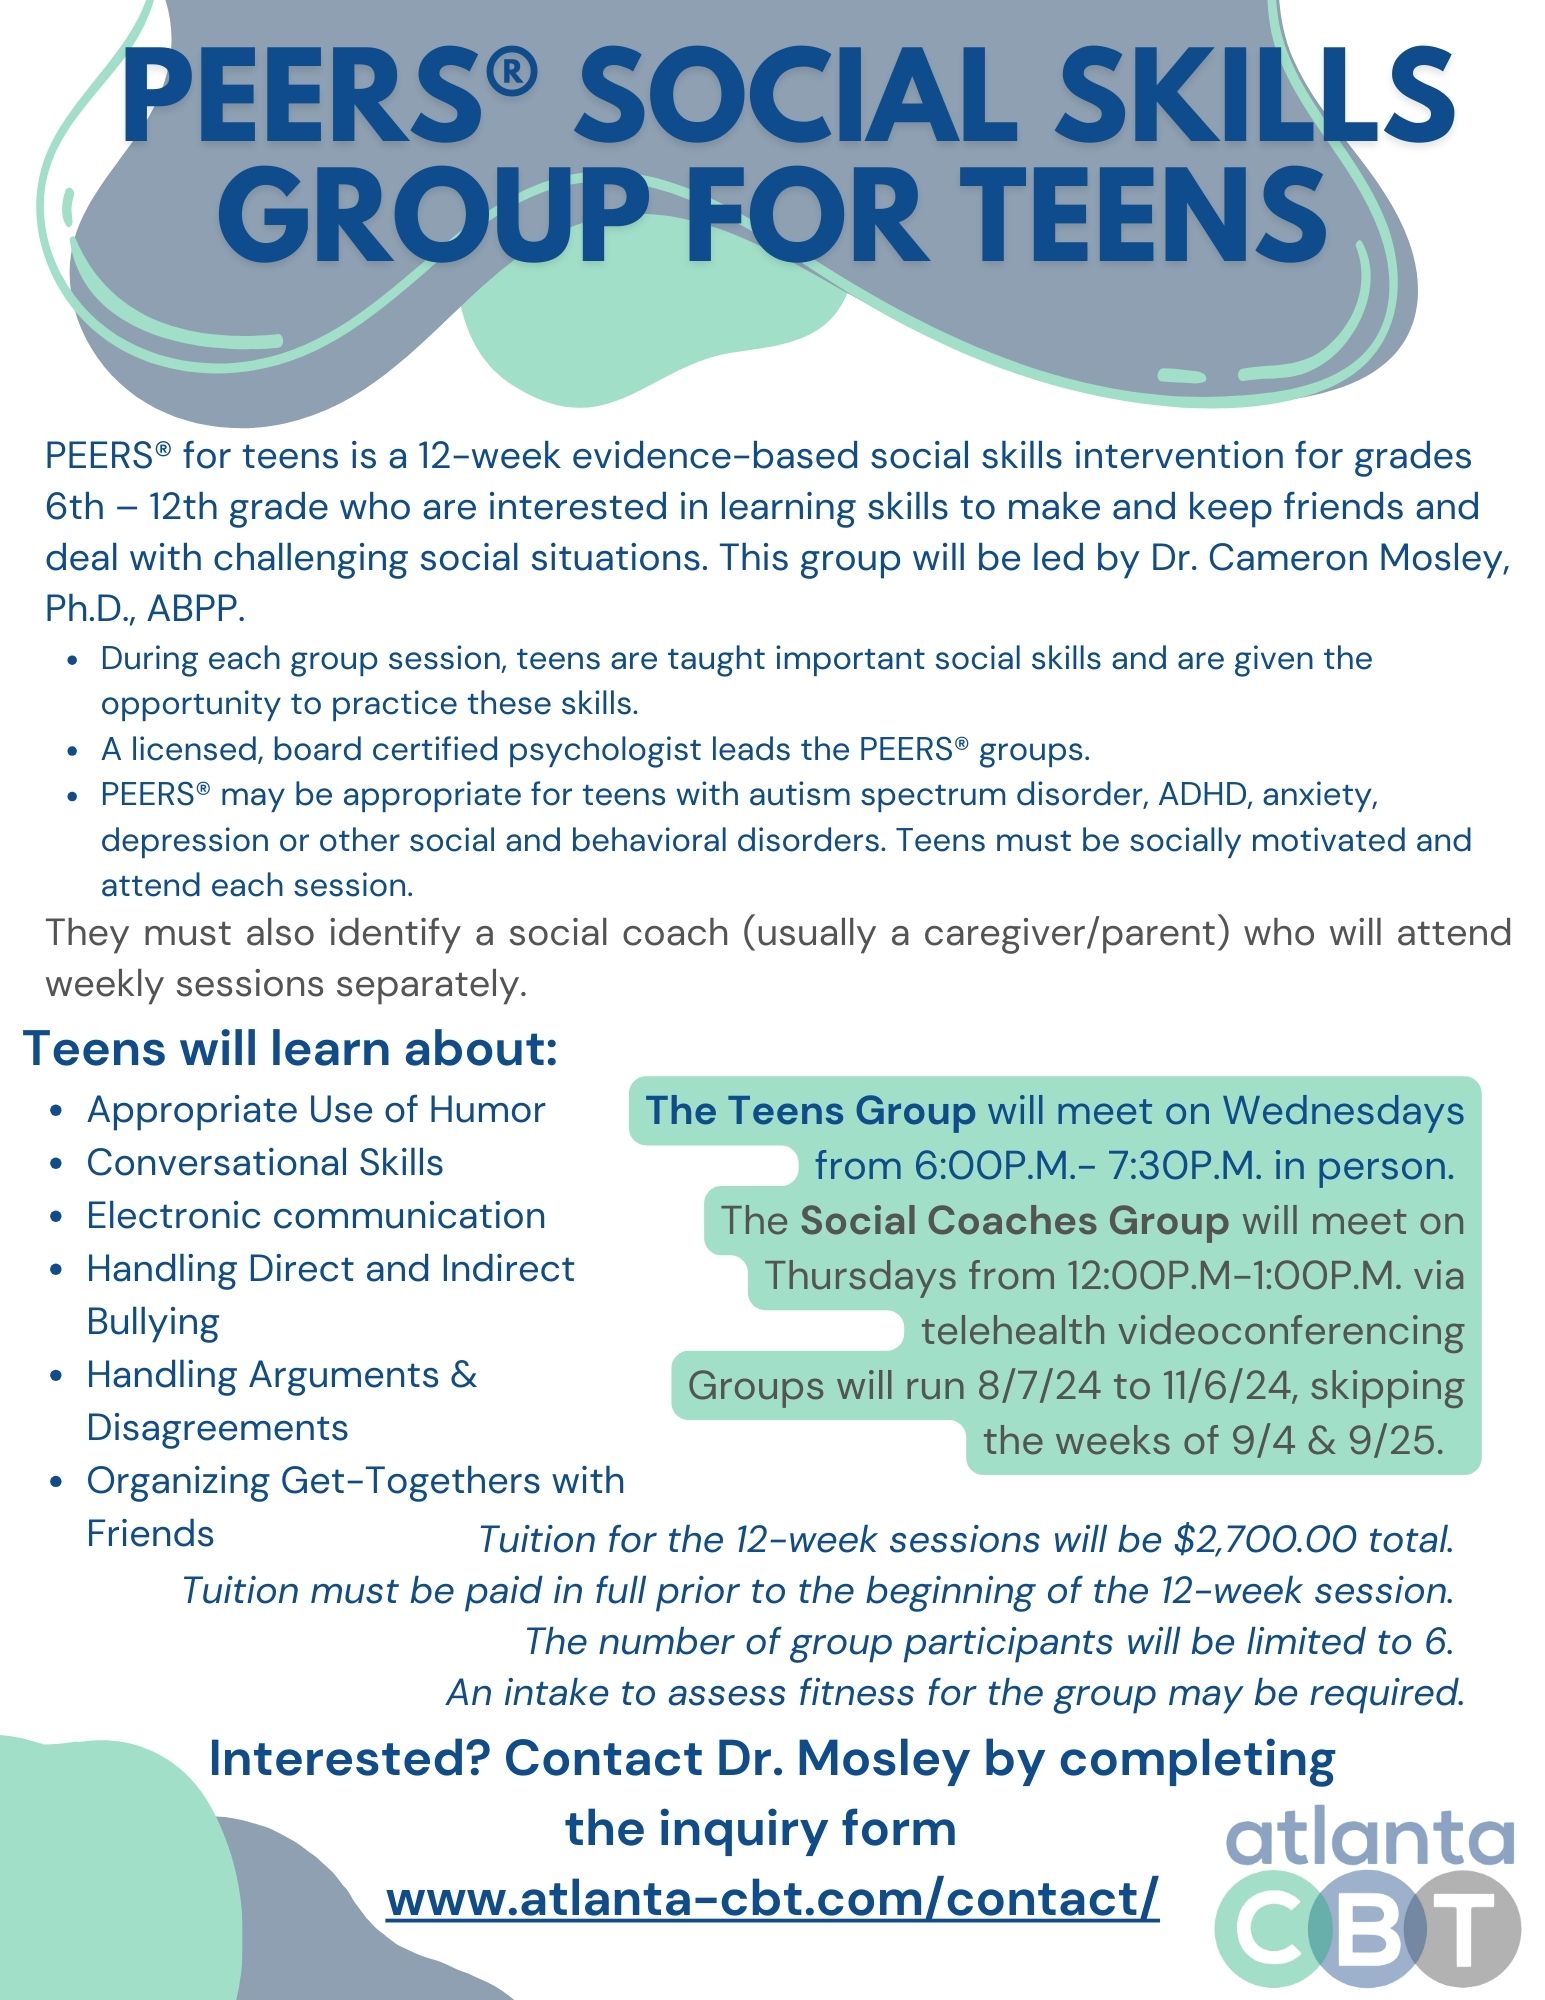 PEERS® for teens is a 12-week evidence-based social skills intervention for grades 6th - 12th grade who are interested in learning skills to make and keep friends and deal with challenging social situations. This group will be led by Dr. Cameron Mosley, Ph.D., ABPP.